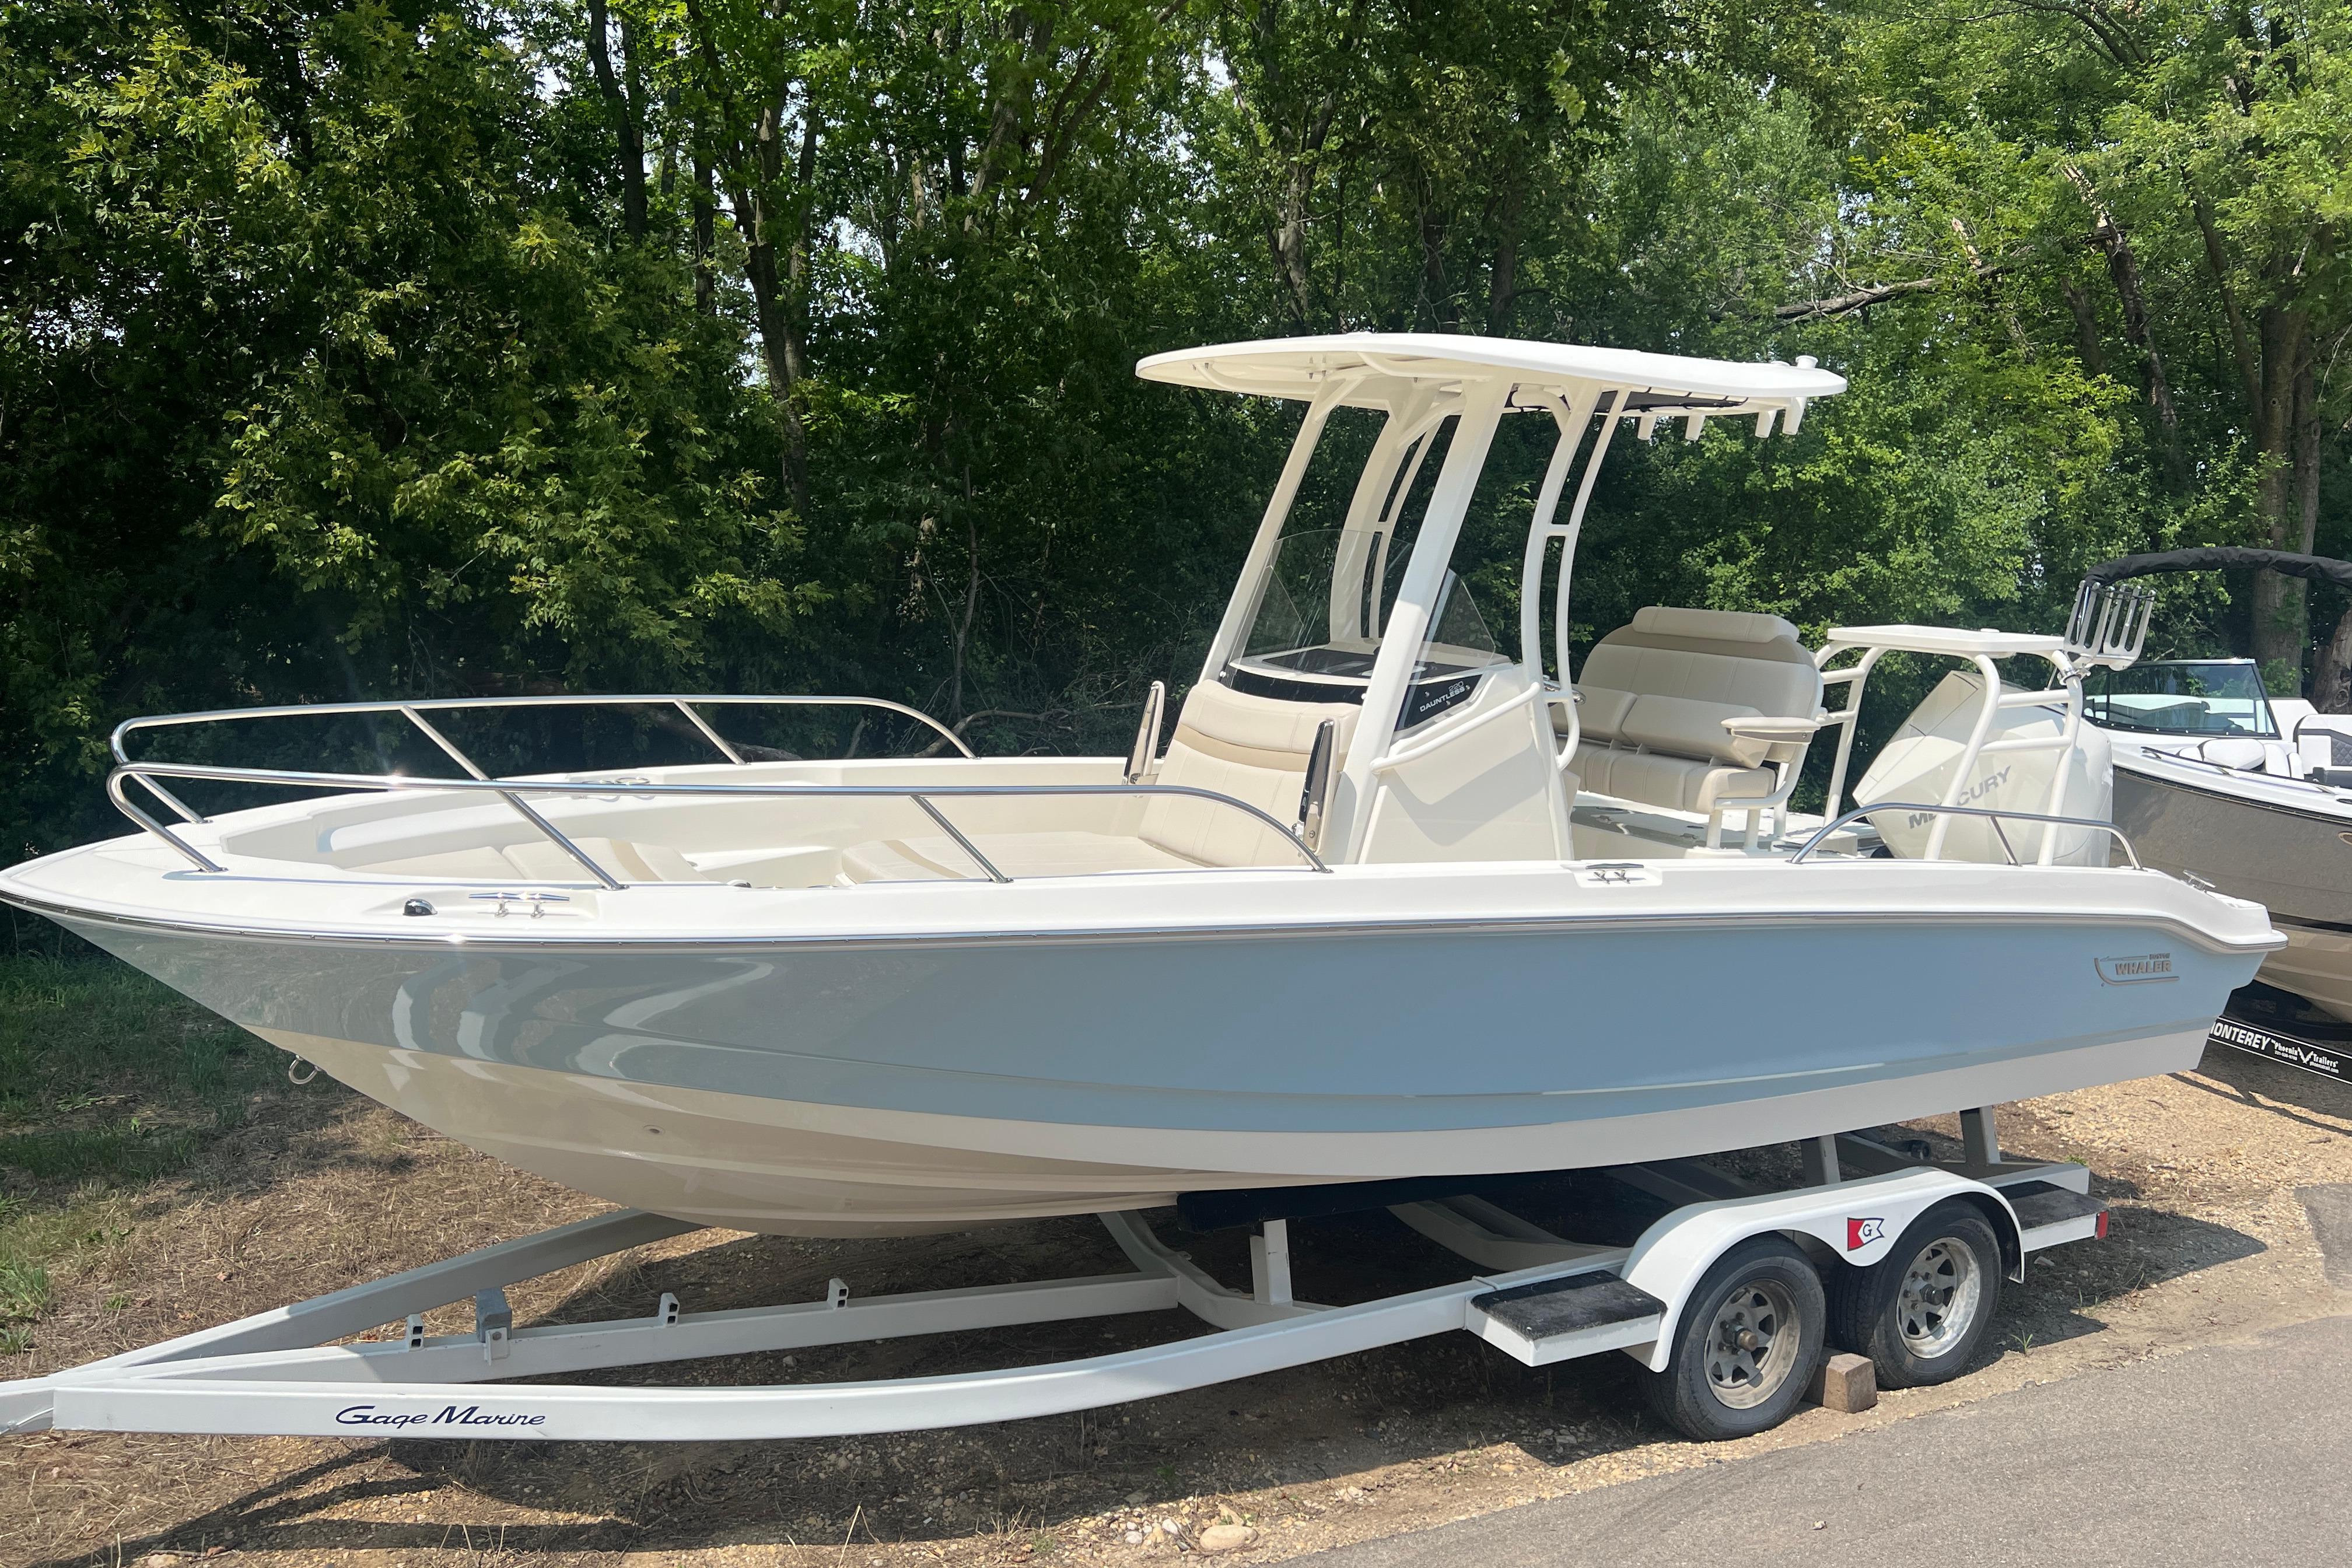 Aluminum Fish Boats For Sale within Any Distance of Beaver Dam, WI